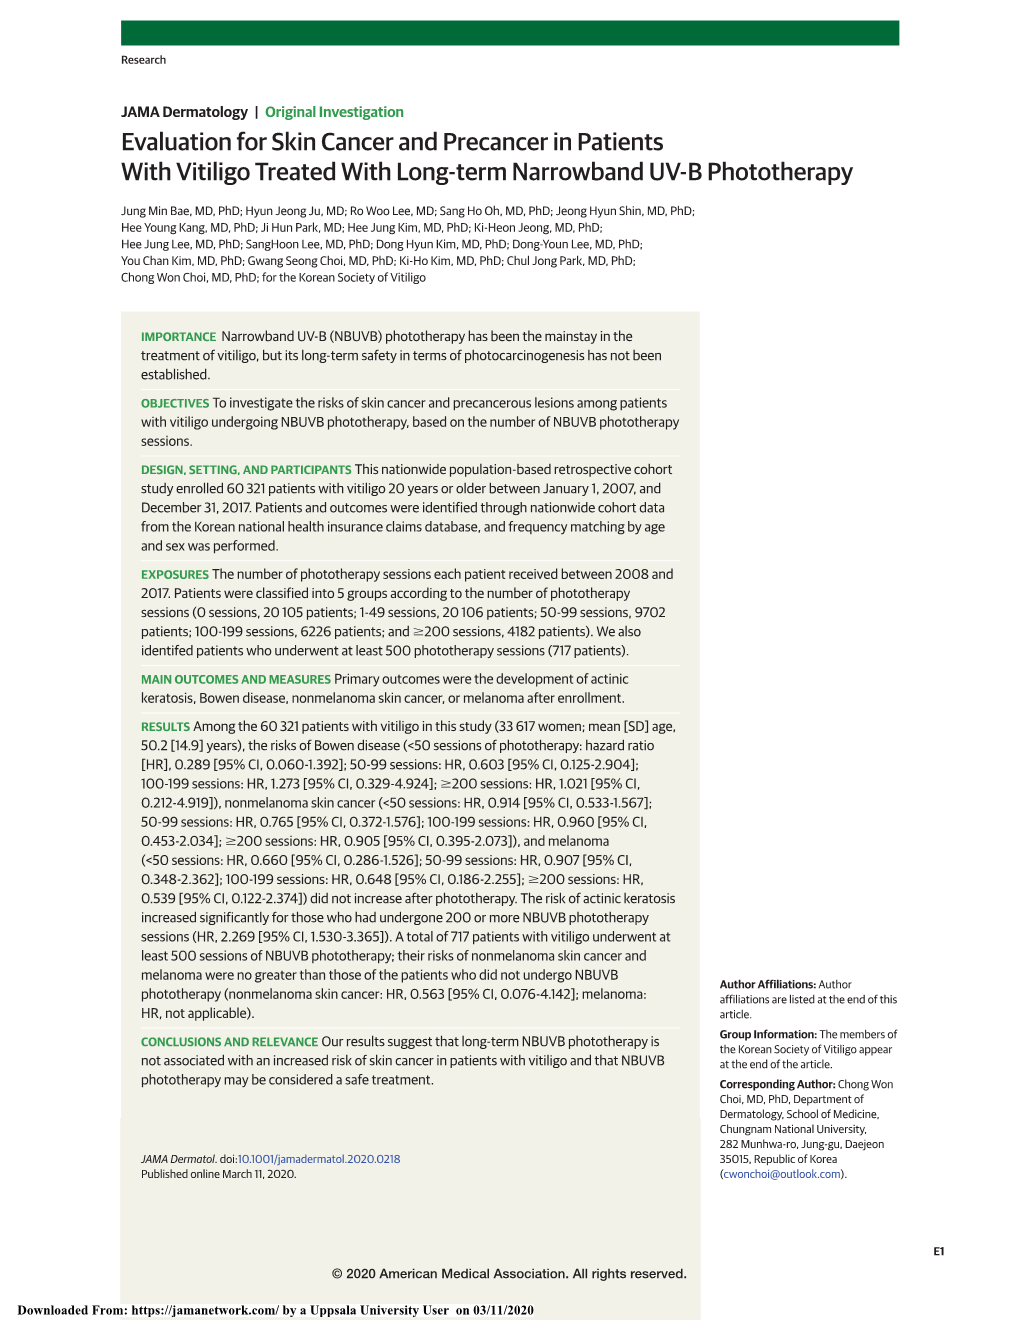 Evaluation for Skin Cancer and Precancer in Patients with Vitiligo Treated with Long-Term Narrowband UV-B Phototherapy